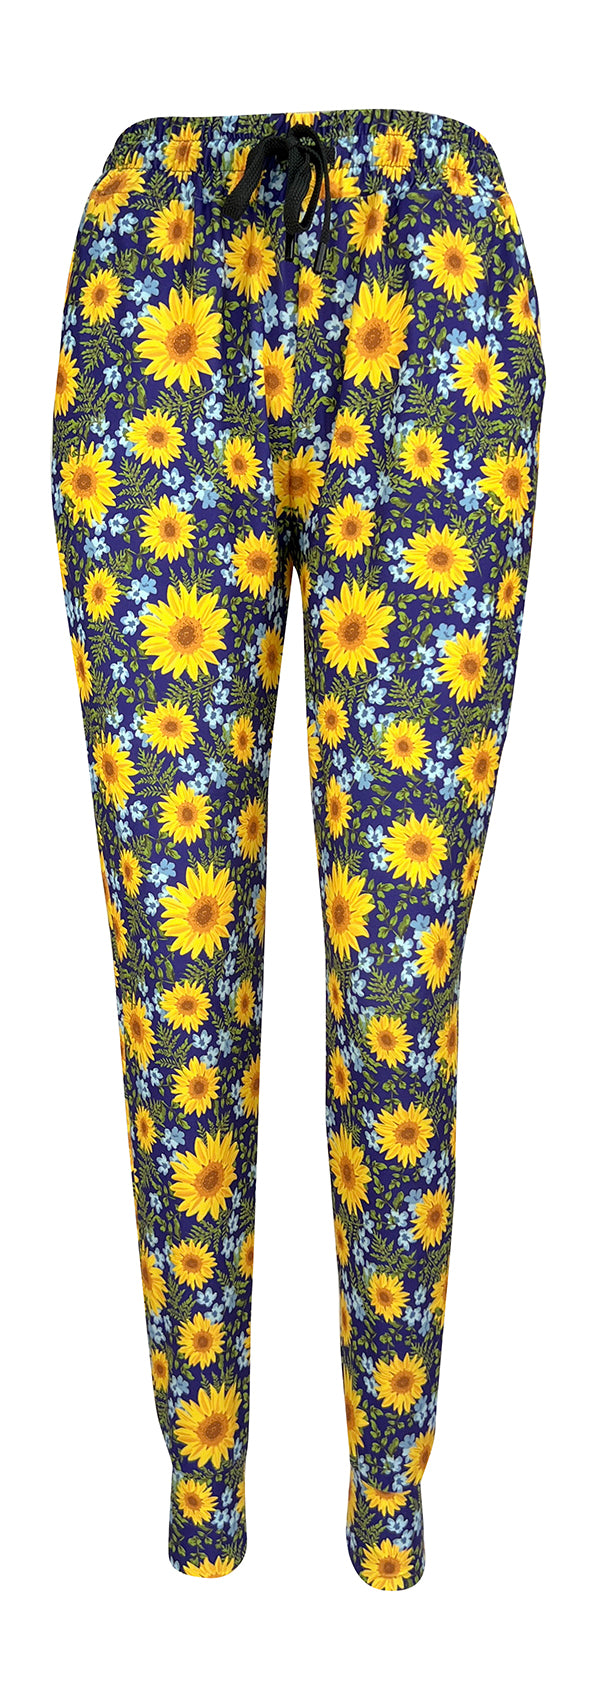 Sunflower Meadow Joggers-Joggers